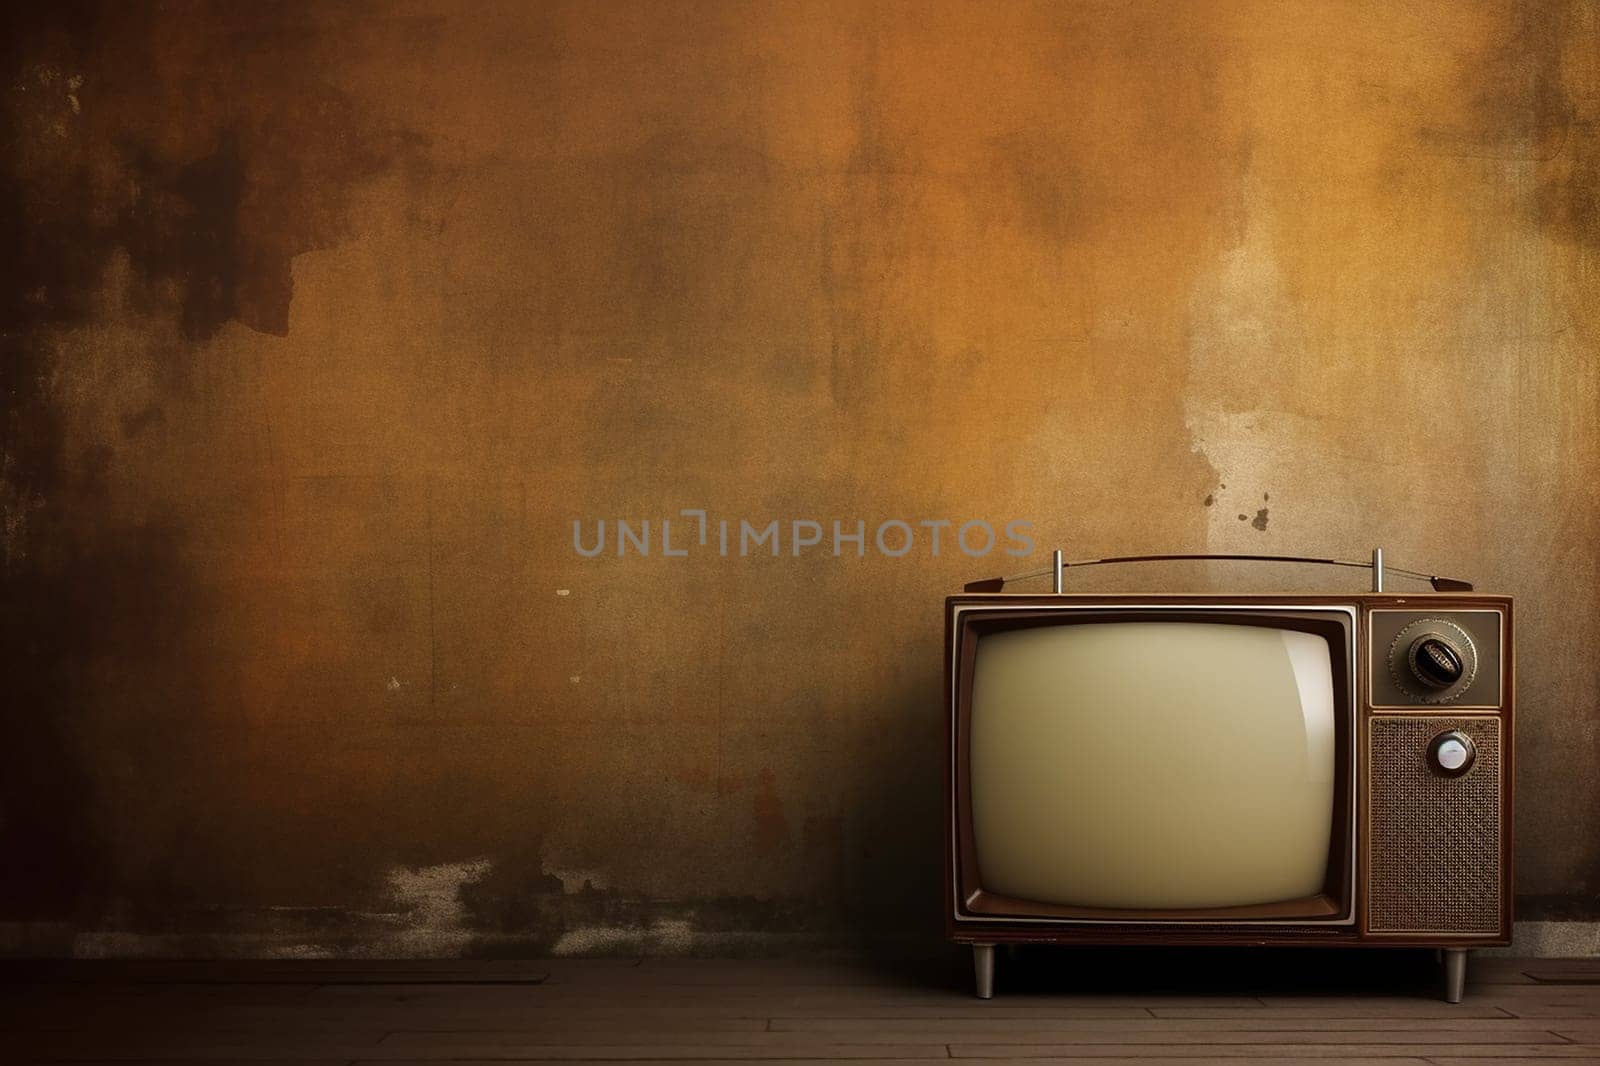 Vintage Television Against a Weathered Wall, with copy space